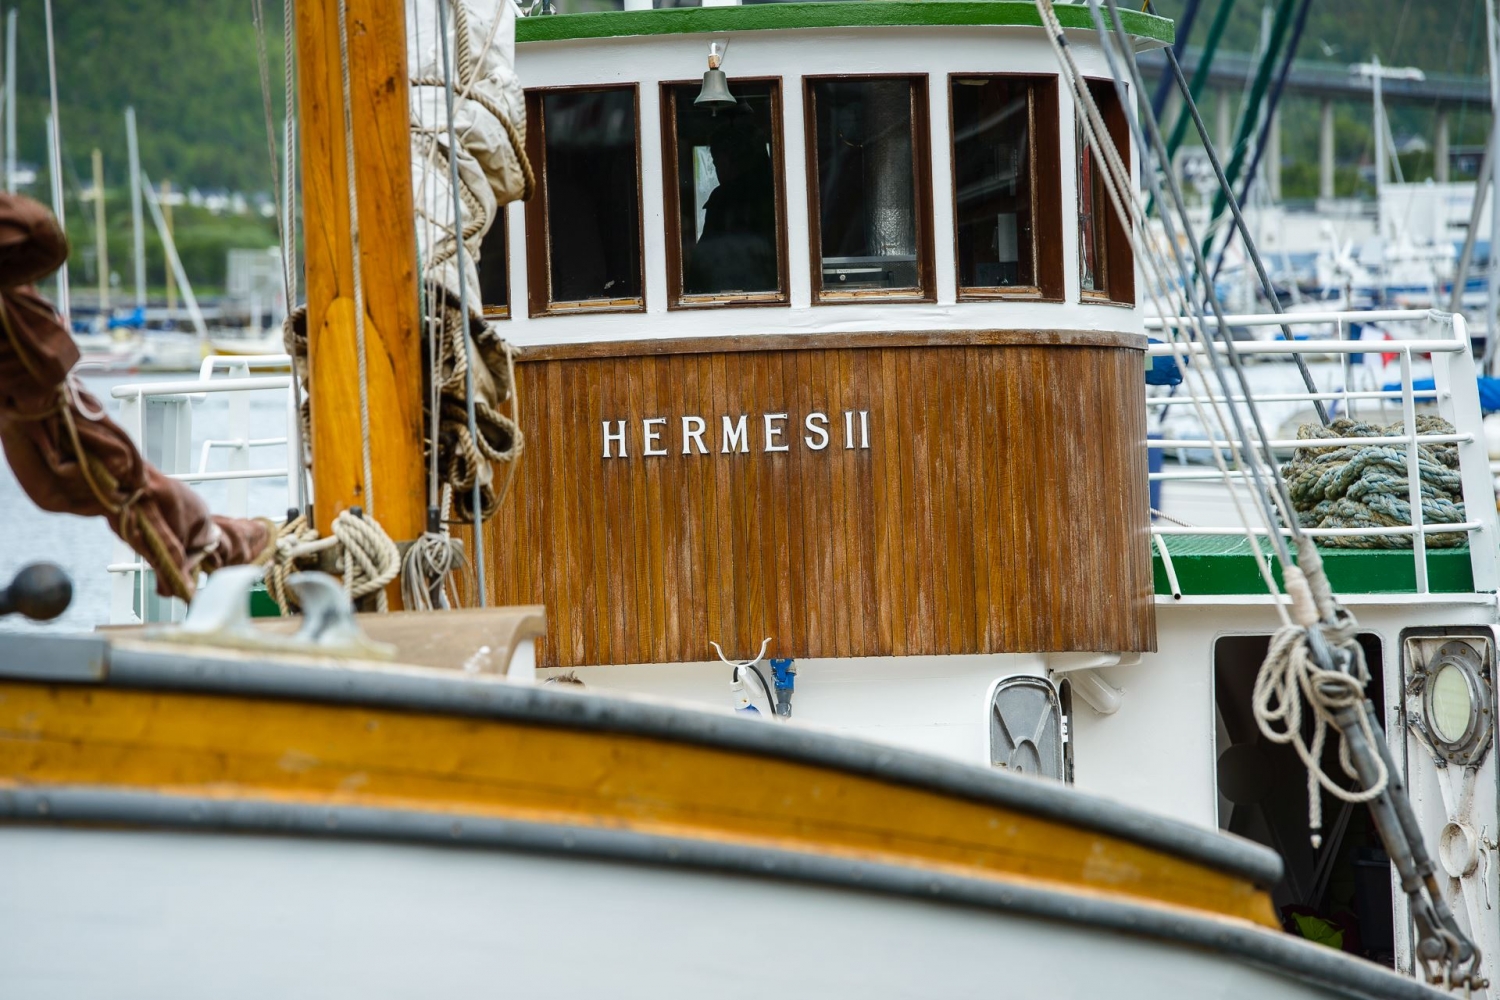 Hermes II at the harbor